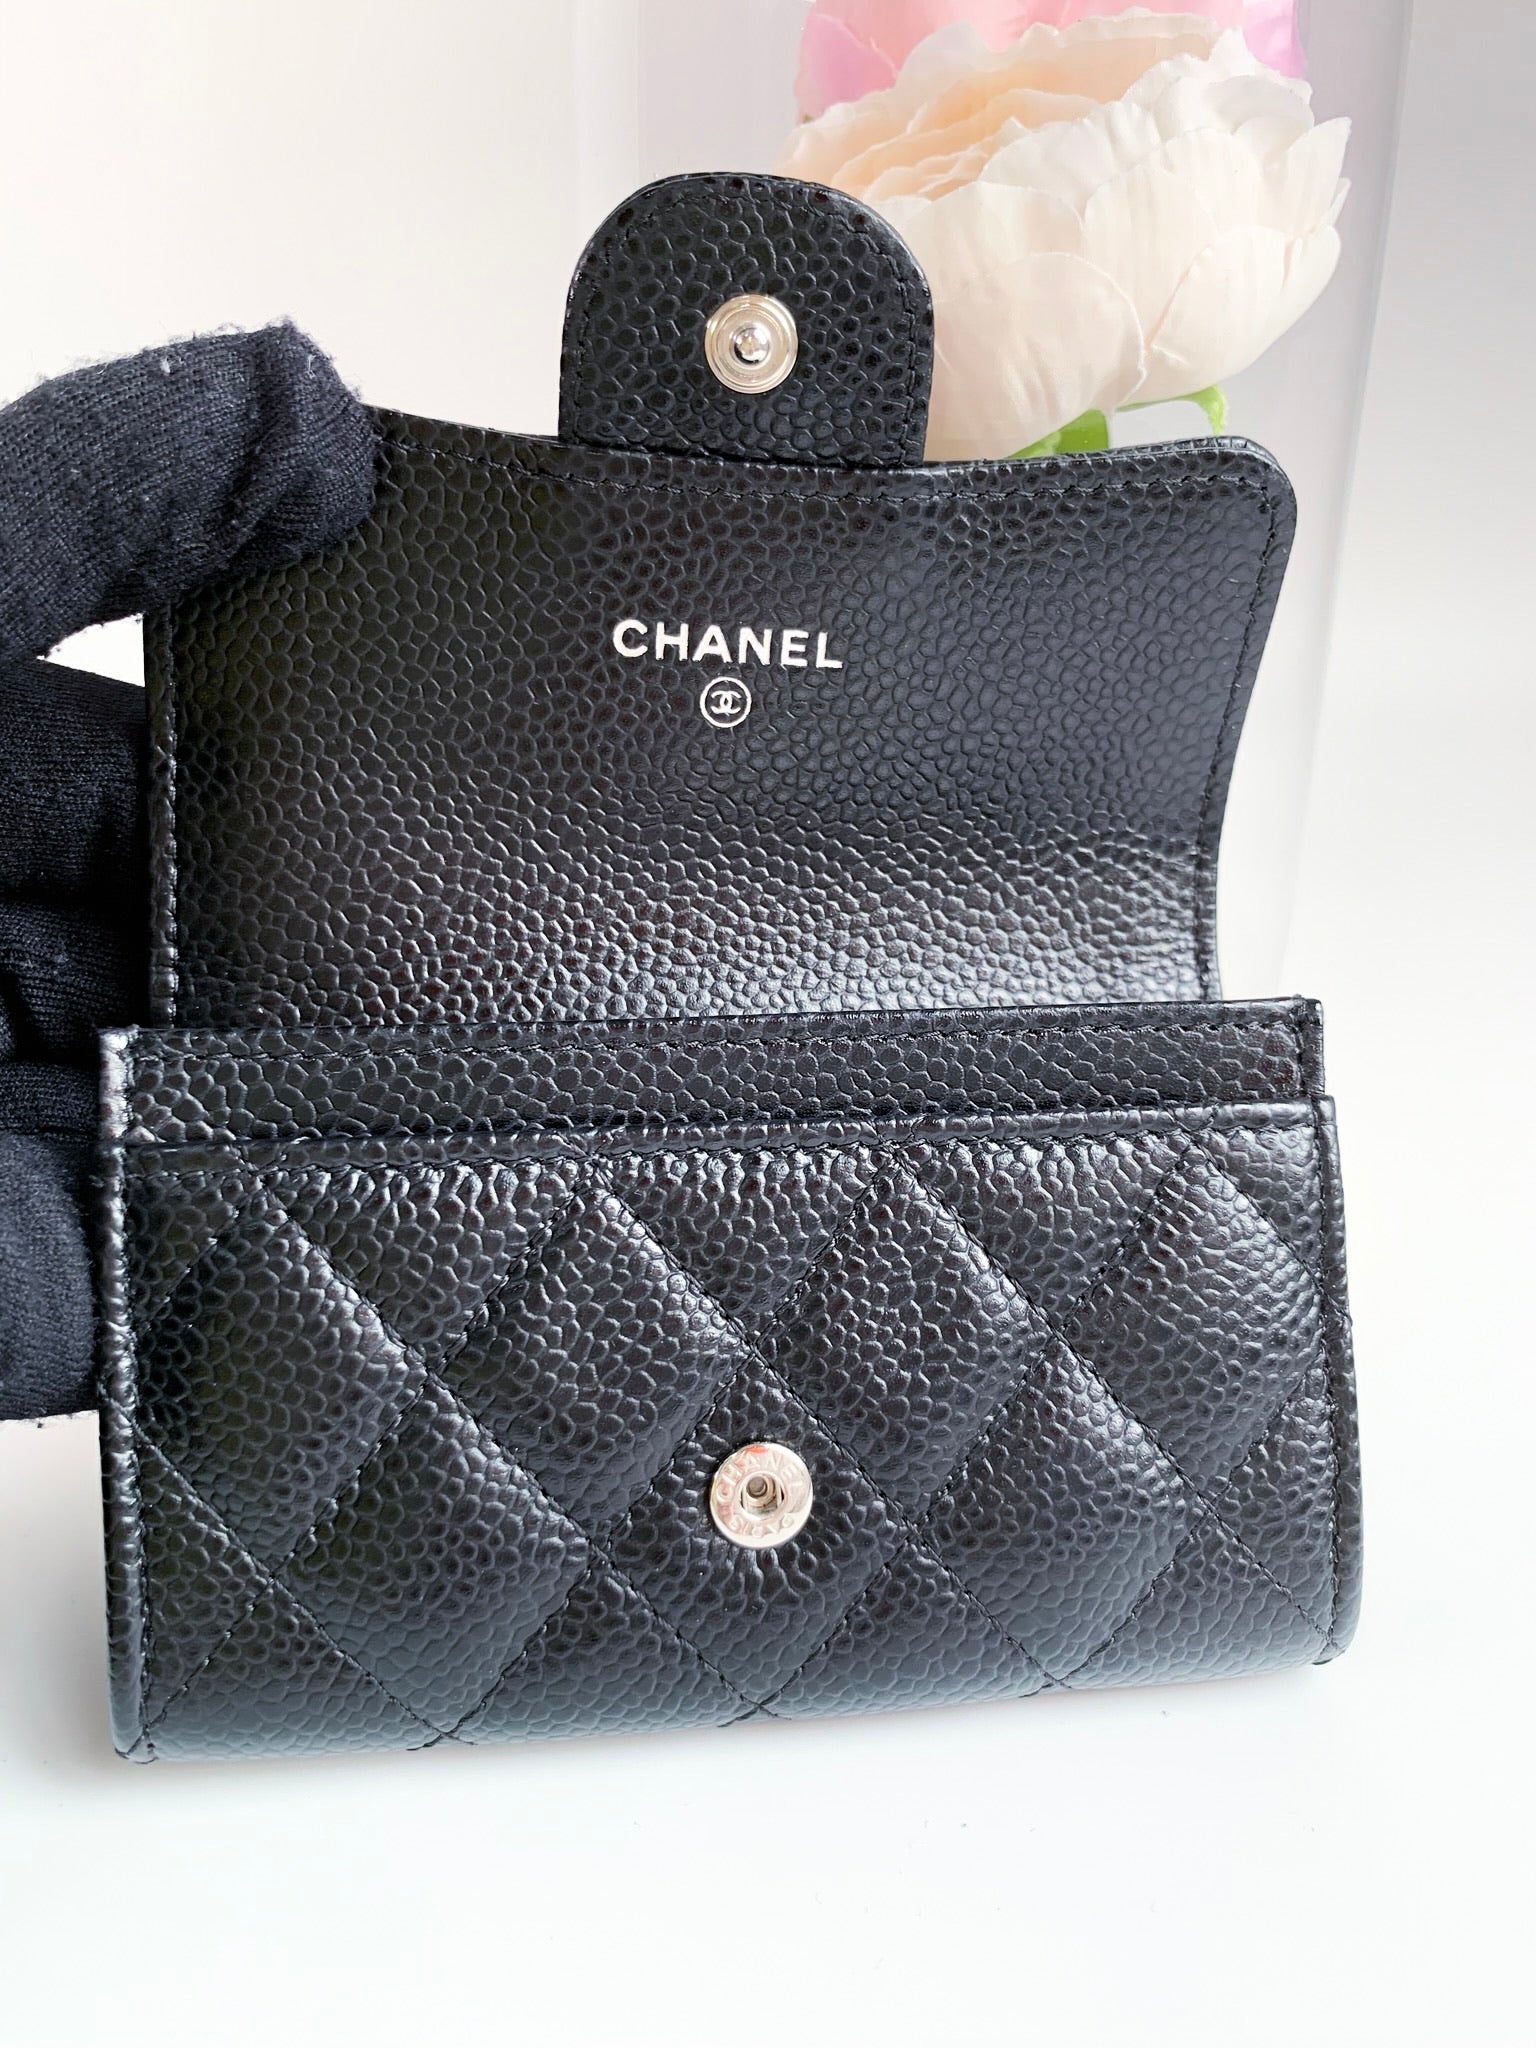 chanel card holder - Google Search